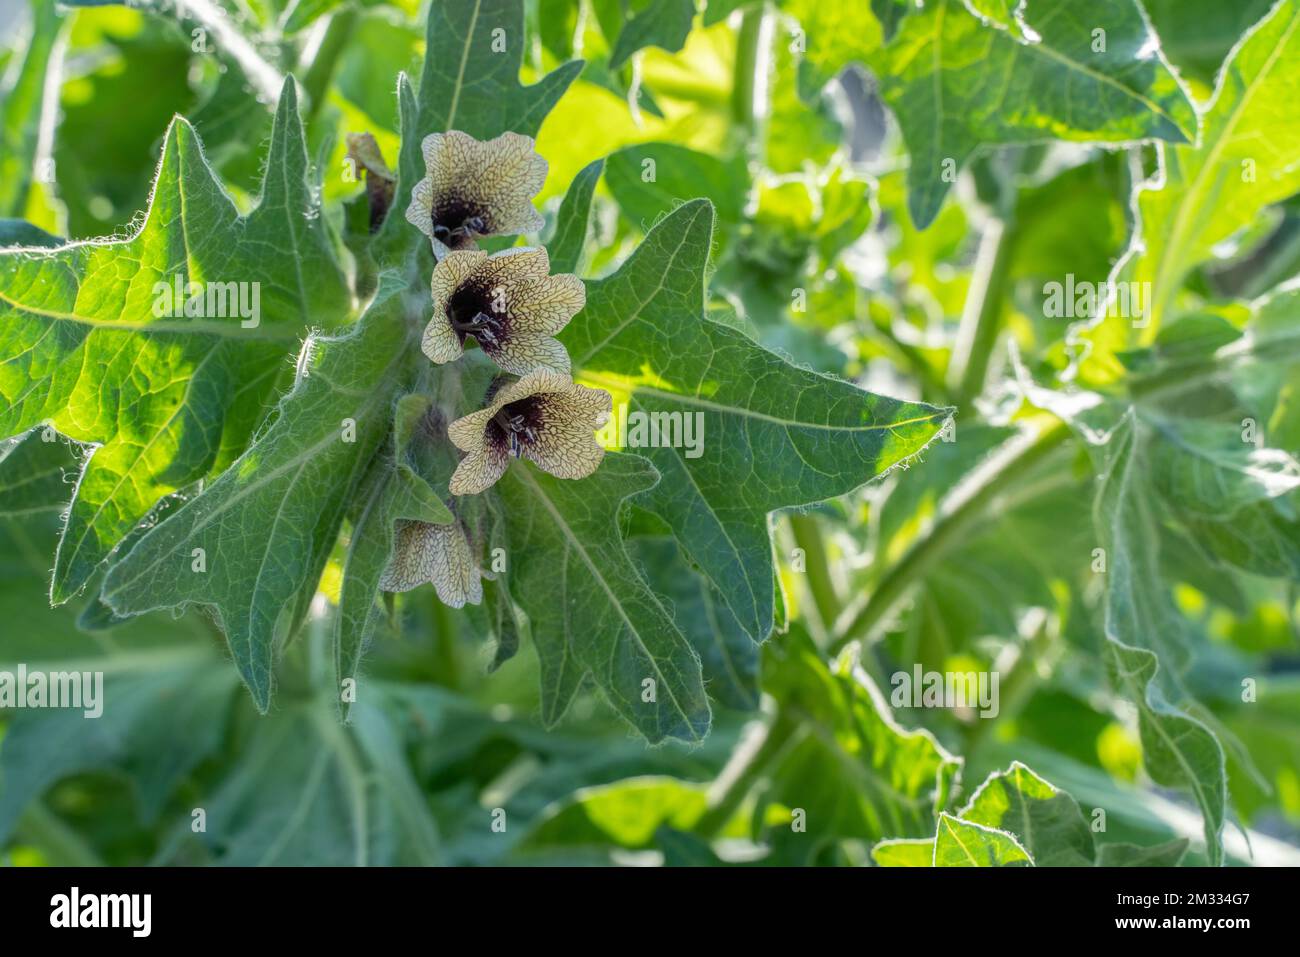 Belladonna medicinal plant, flowers and leaves close-up in backlight. Atropa belladonna is a Latin name. It is used as a painkiller. Stock Photo